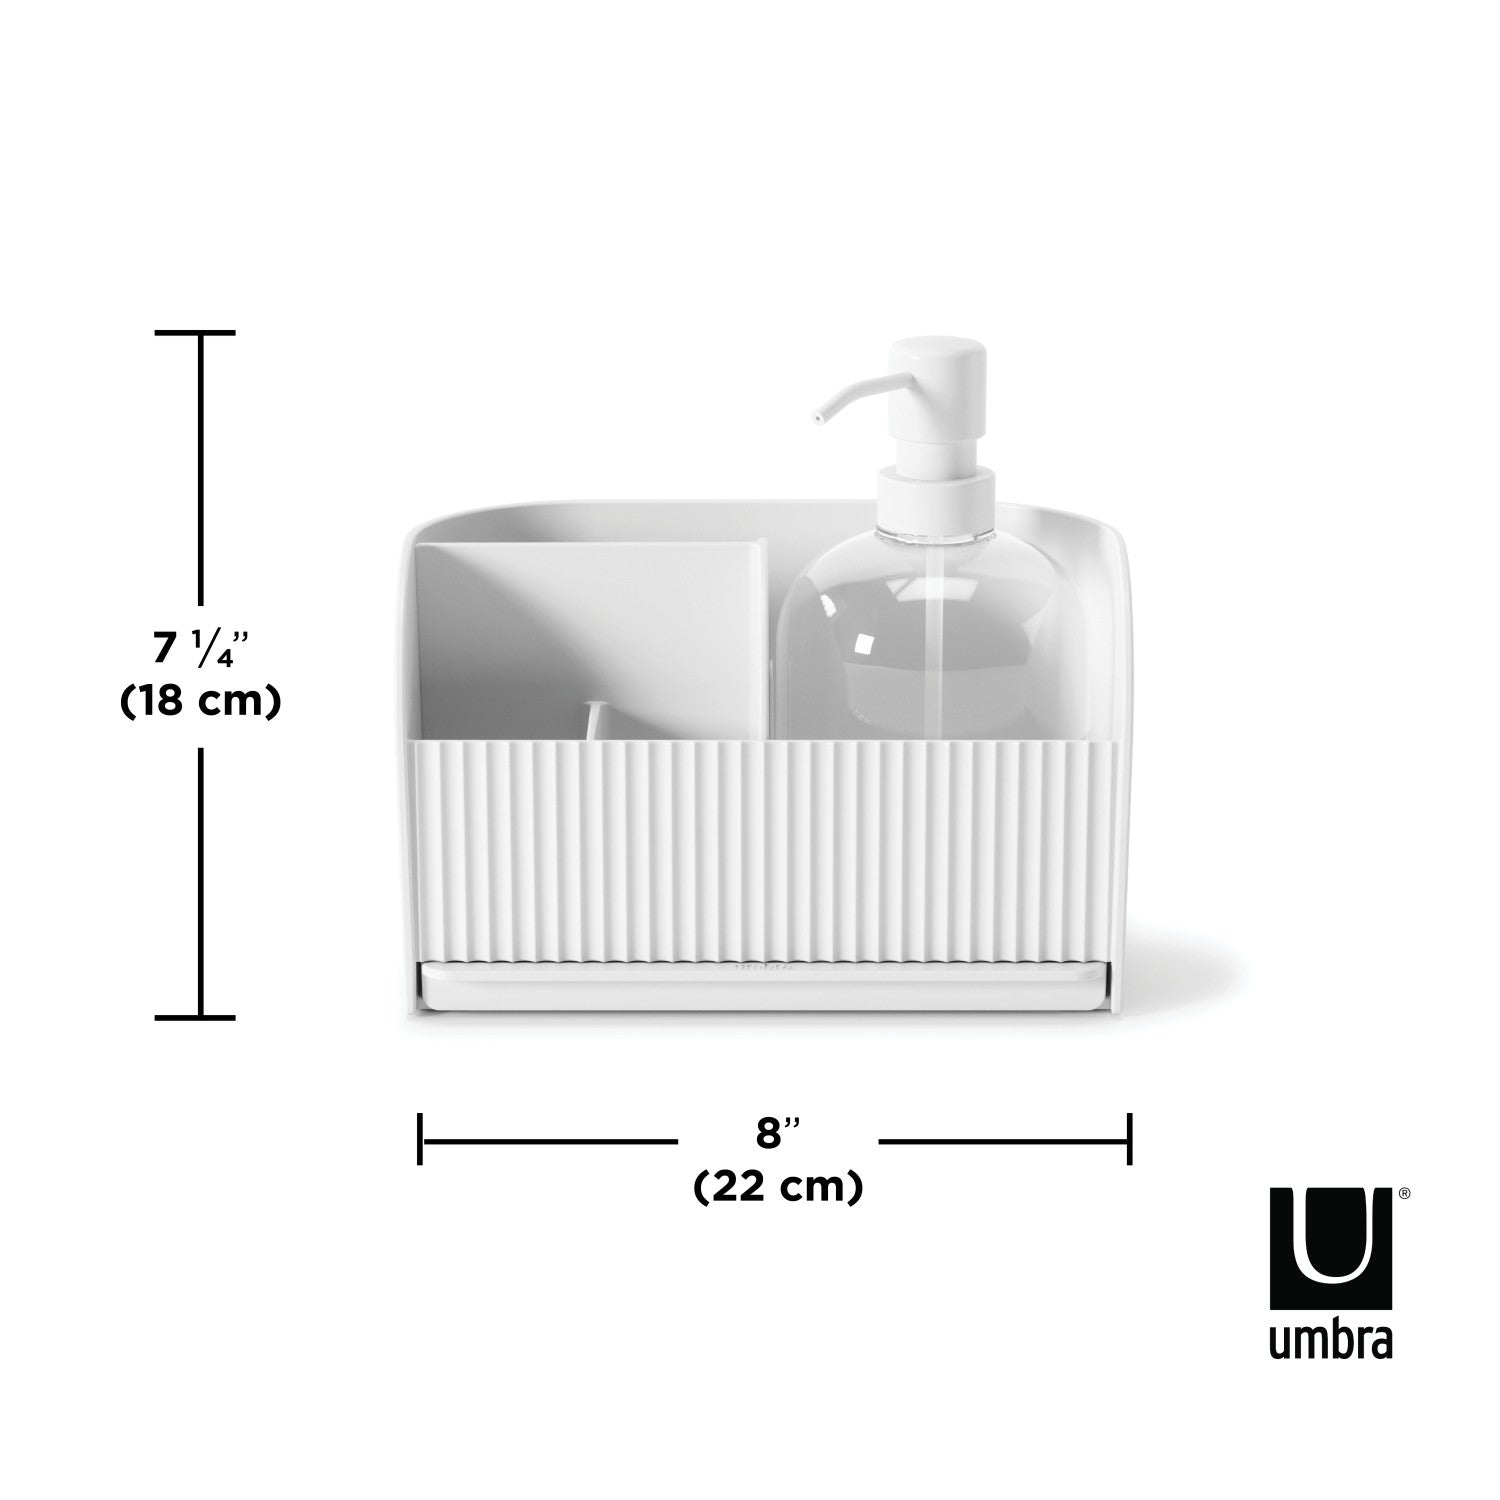 Umbra Sling Sink Caddy with Soap Pump